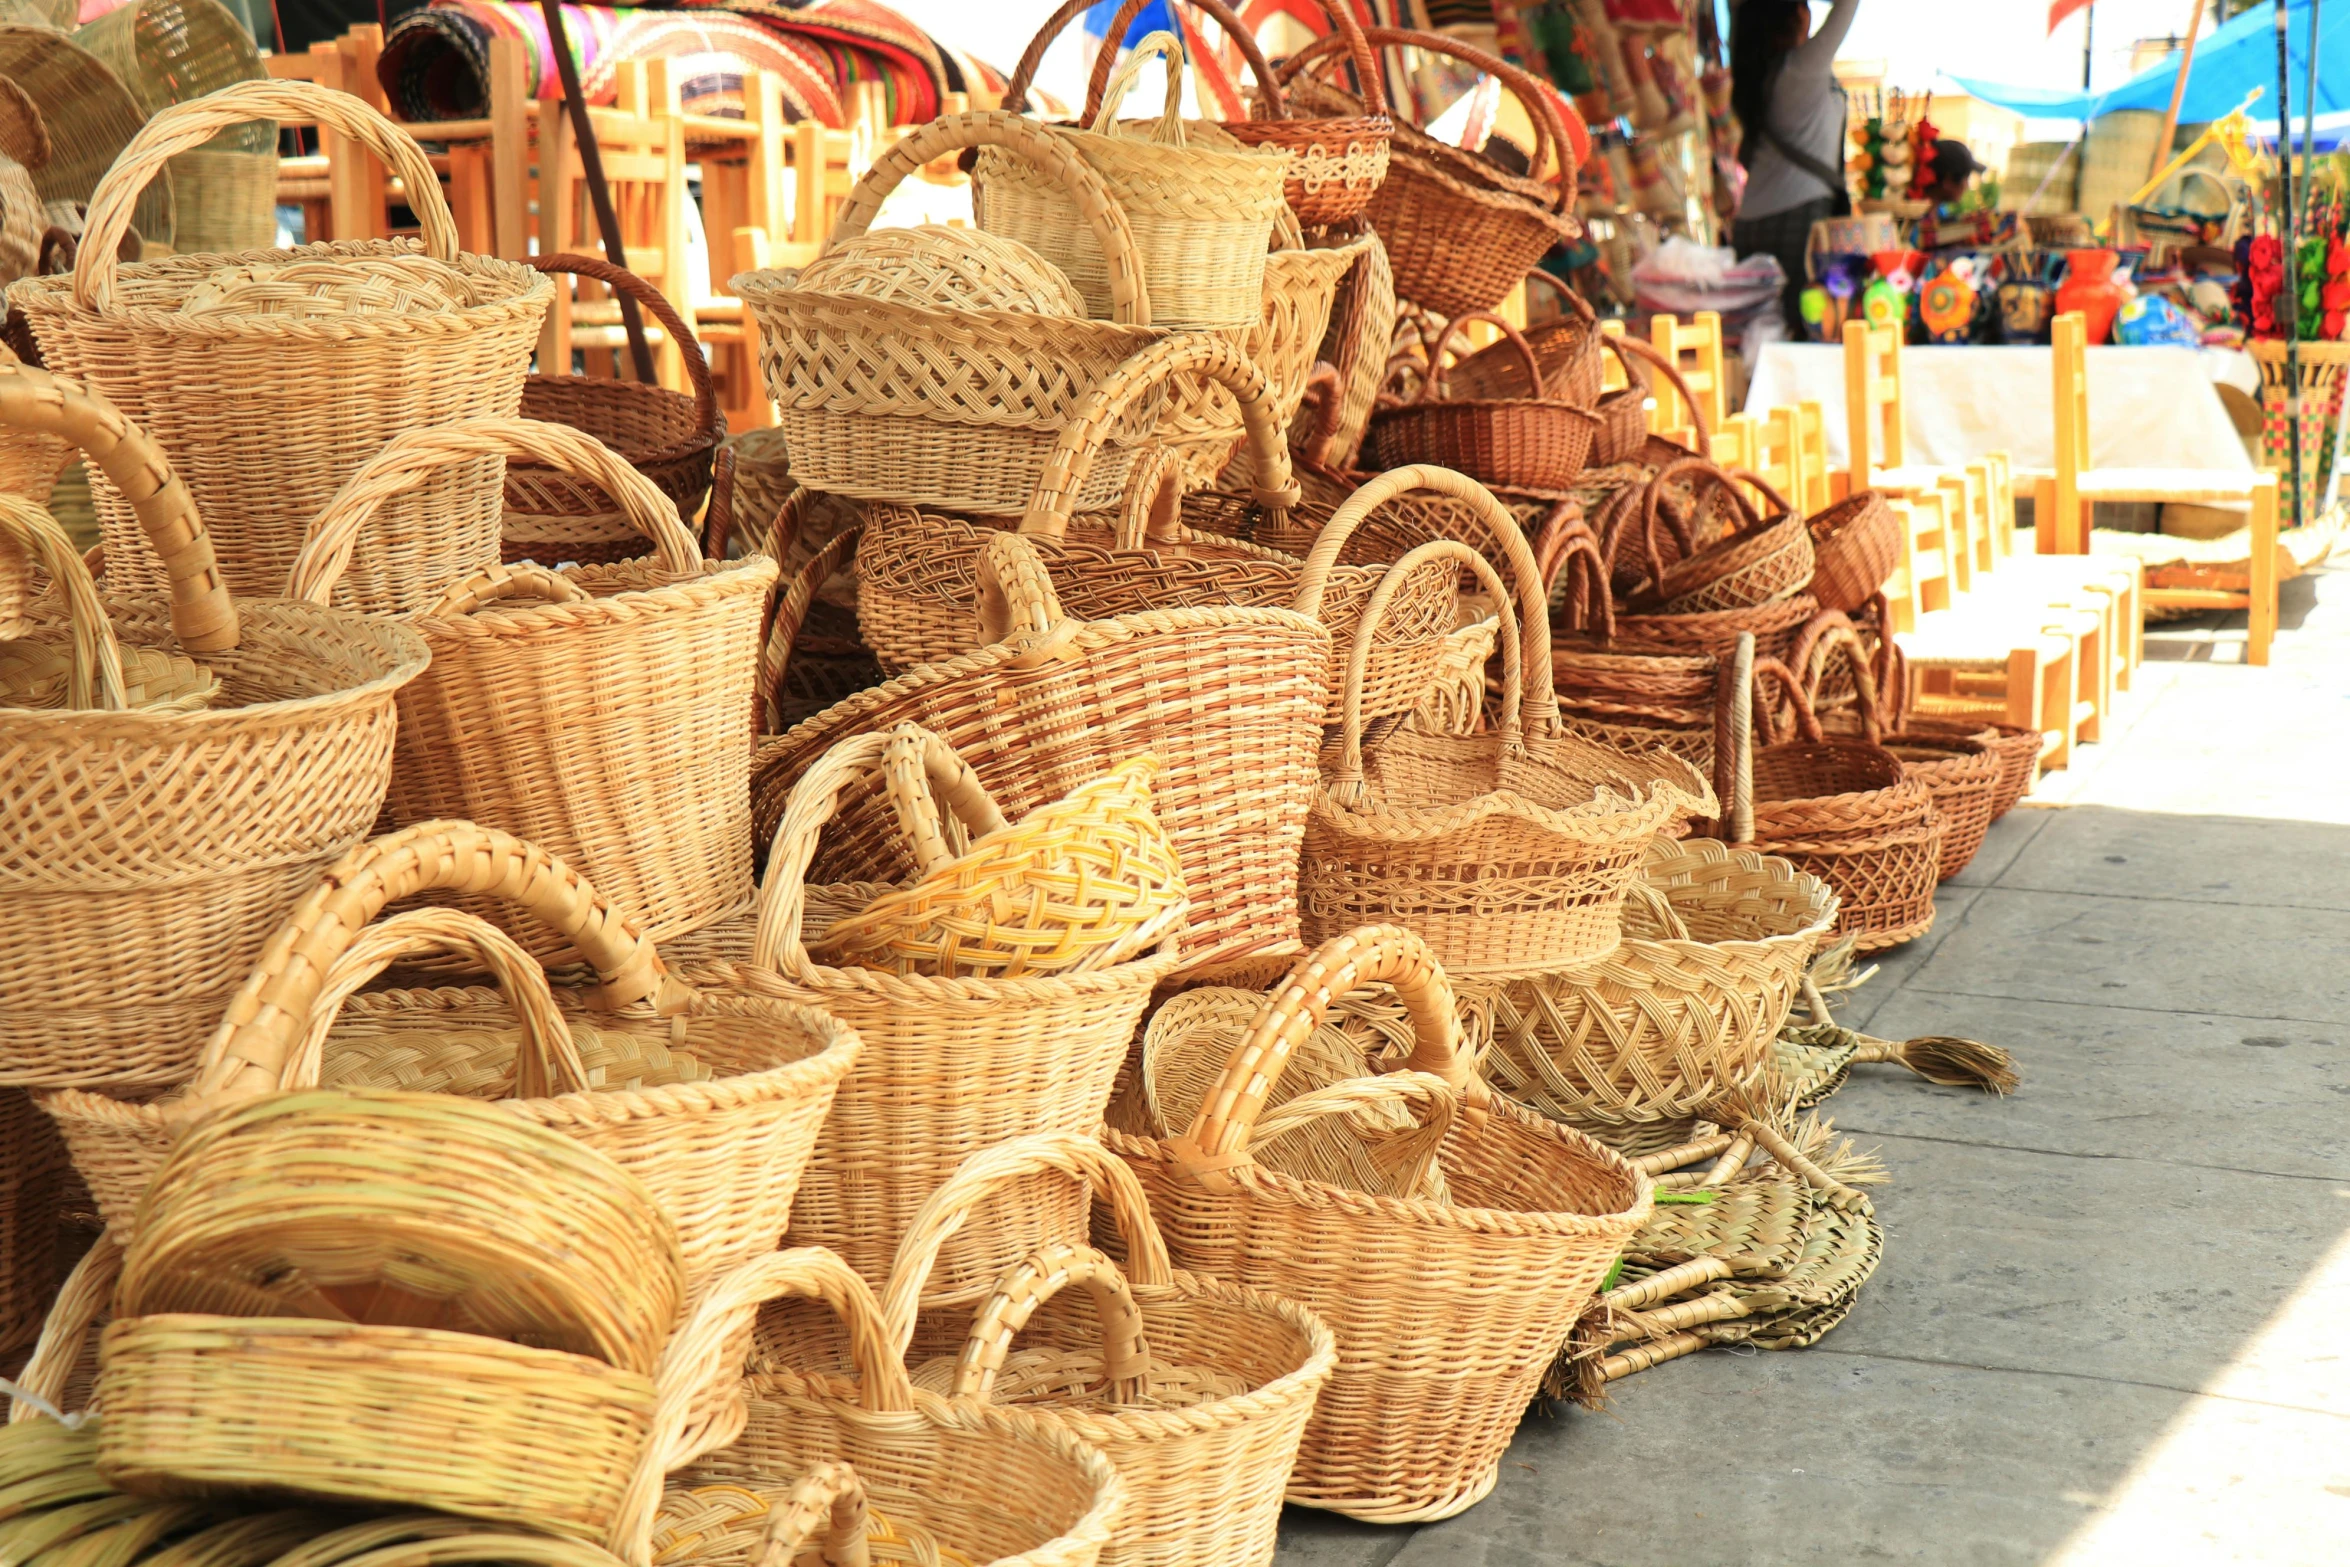 baskets with handles are sitting on the floor